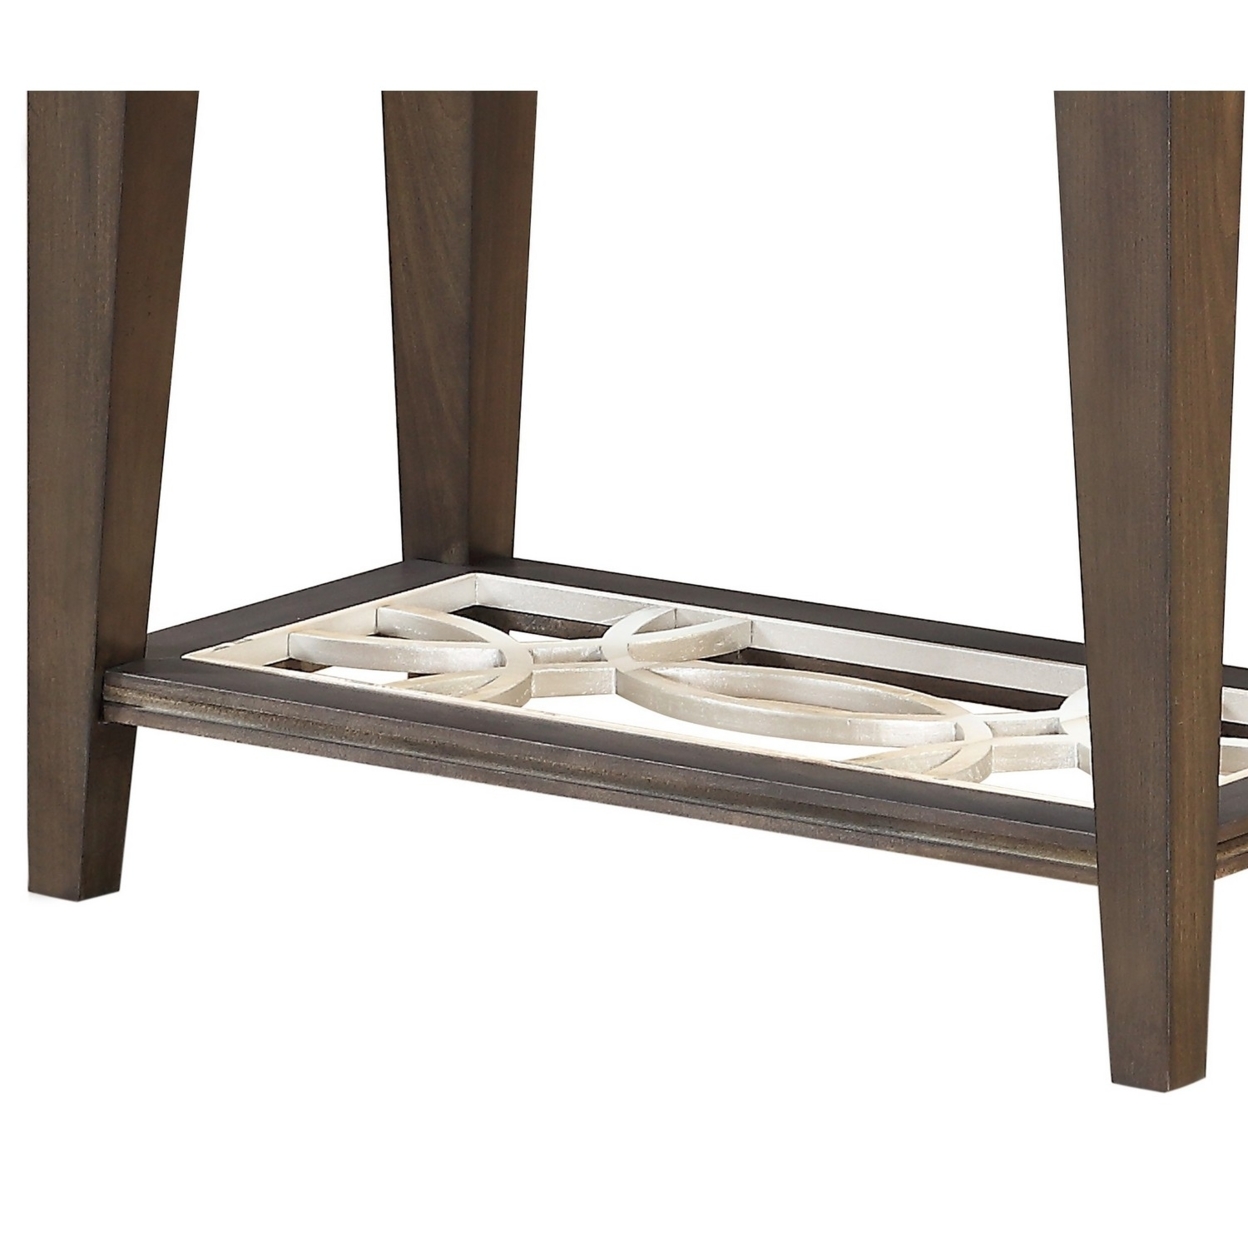 Wood And Glass Side Table With Cut Out Design, Brown- Saltoro Sherpi